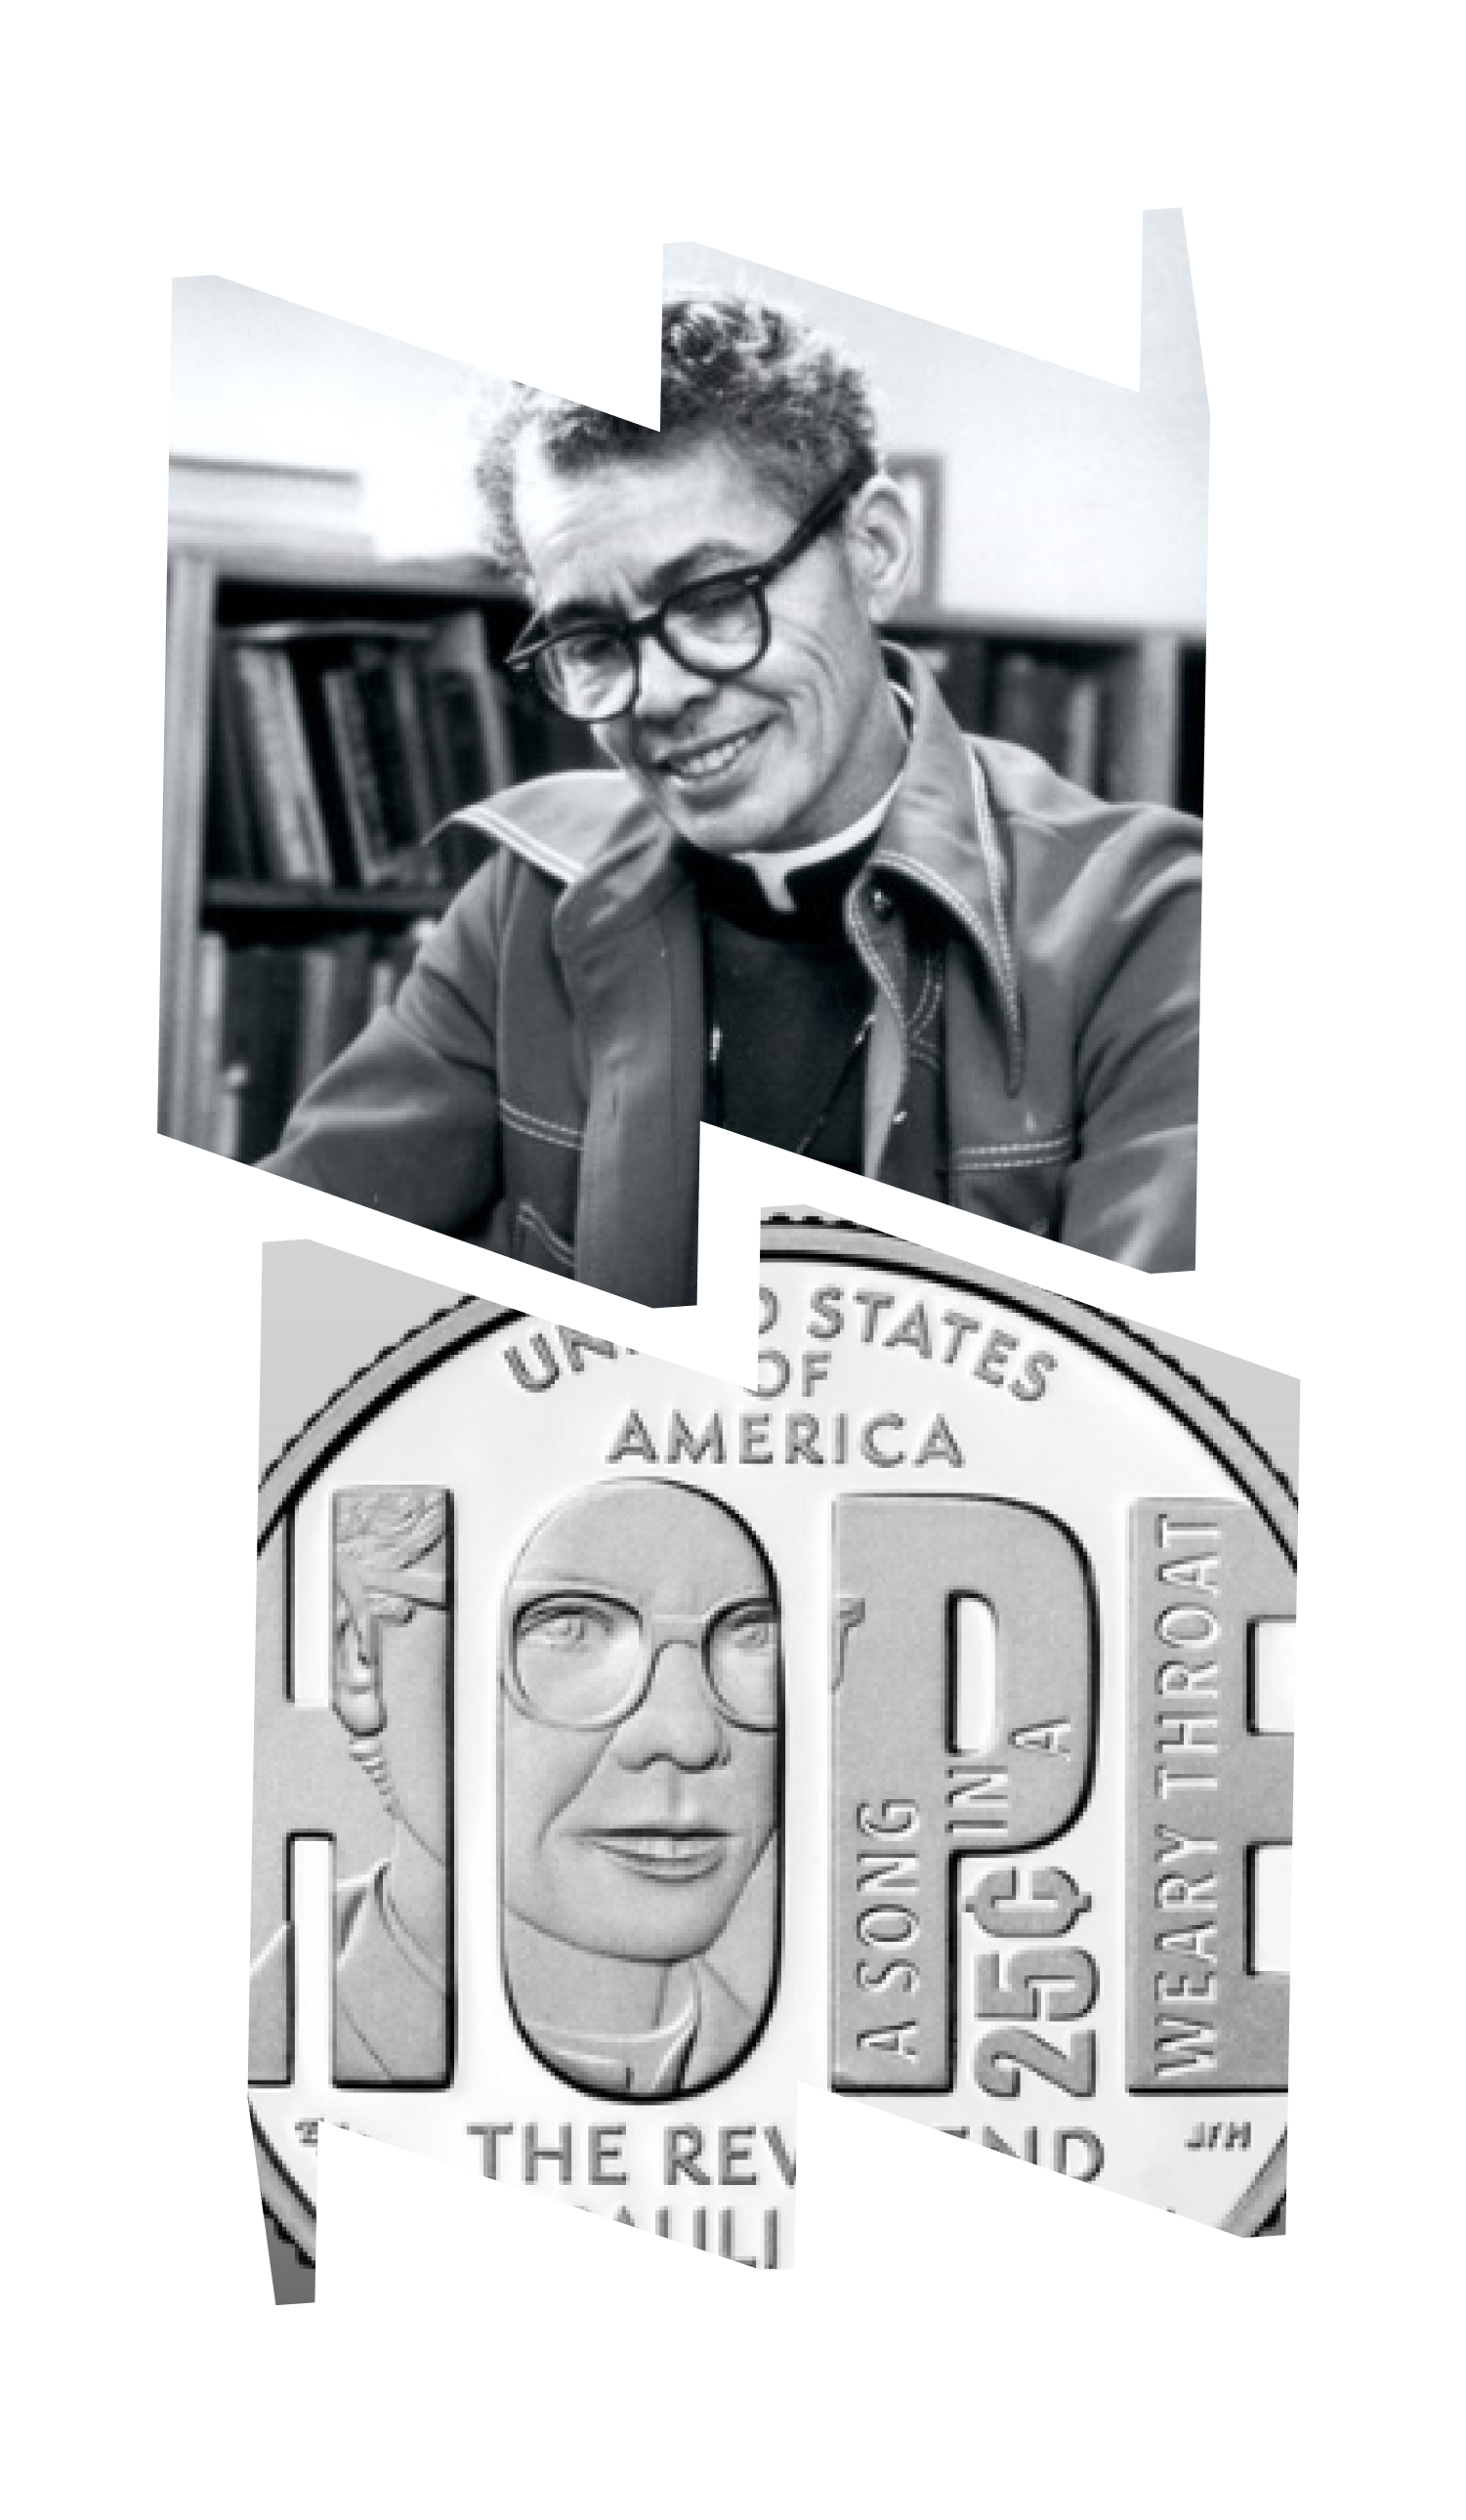 In top "W" frame, a black and white image of Pauli Murray seated and writing; in bottom "M" frame, close-up image of the Pauli Murray quarter.